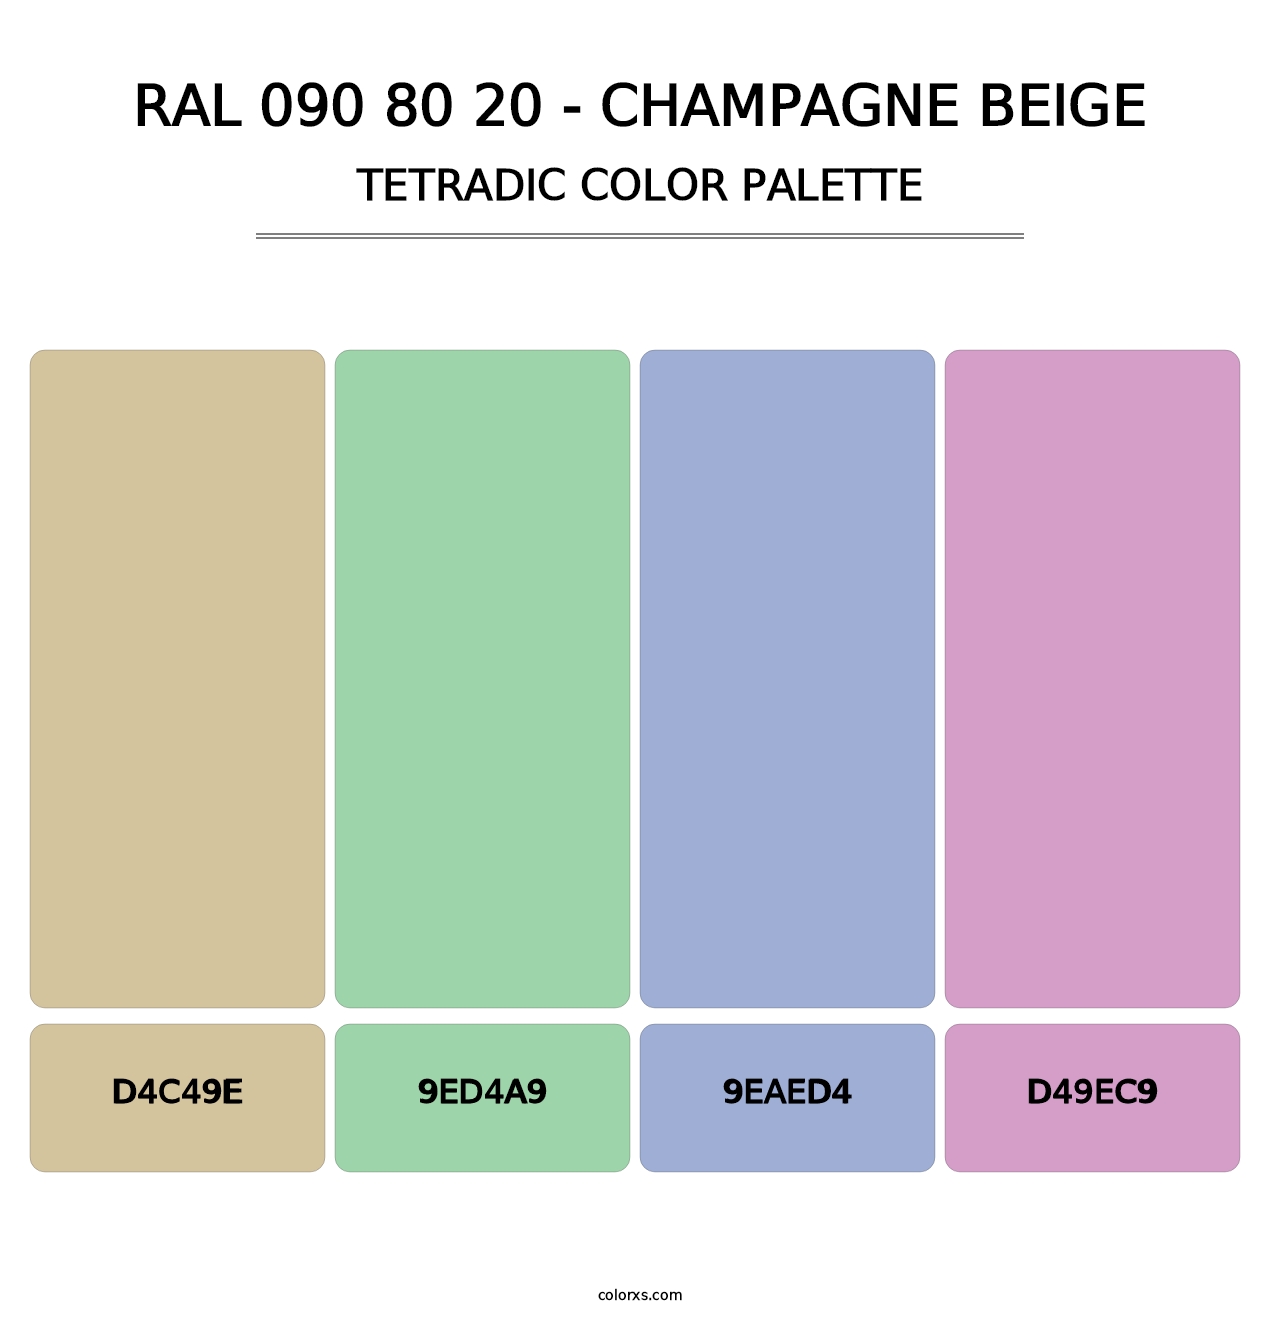 RAL 090 80 20 - Champagne Beige - Tetradic Color Palette